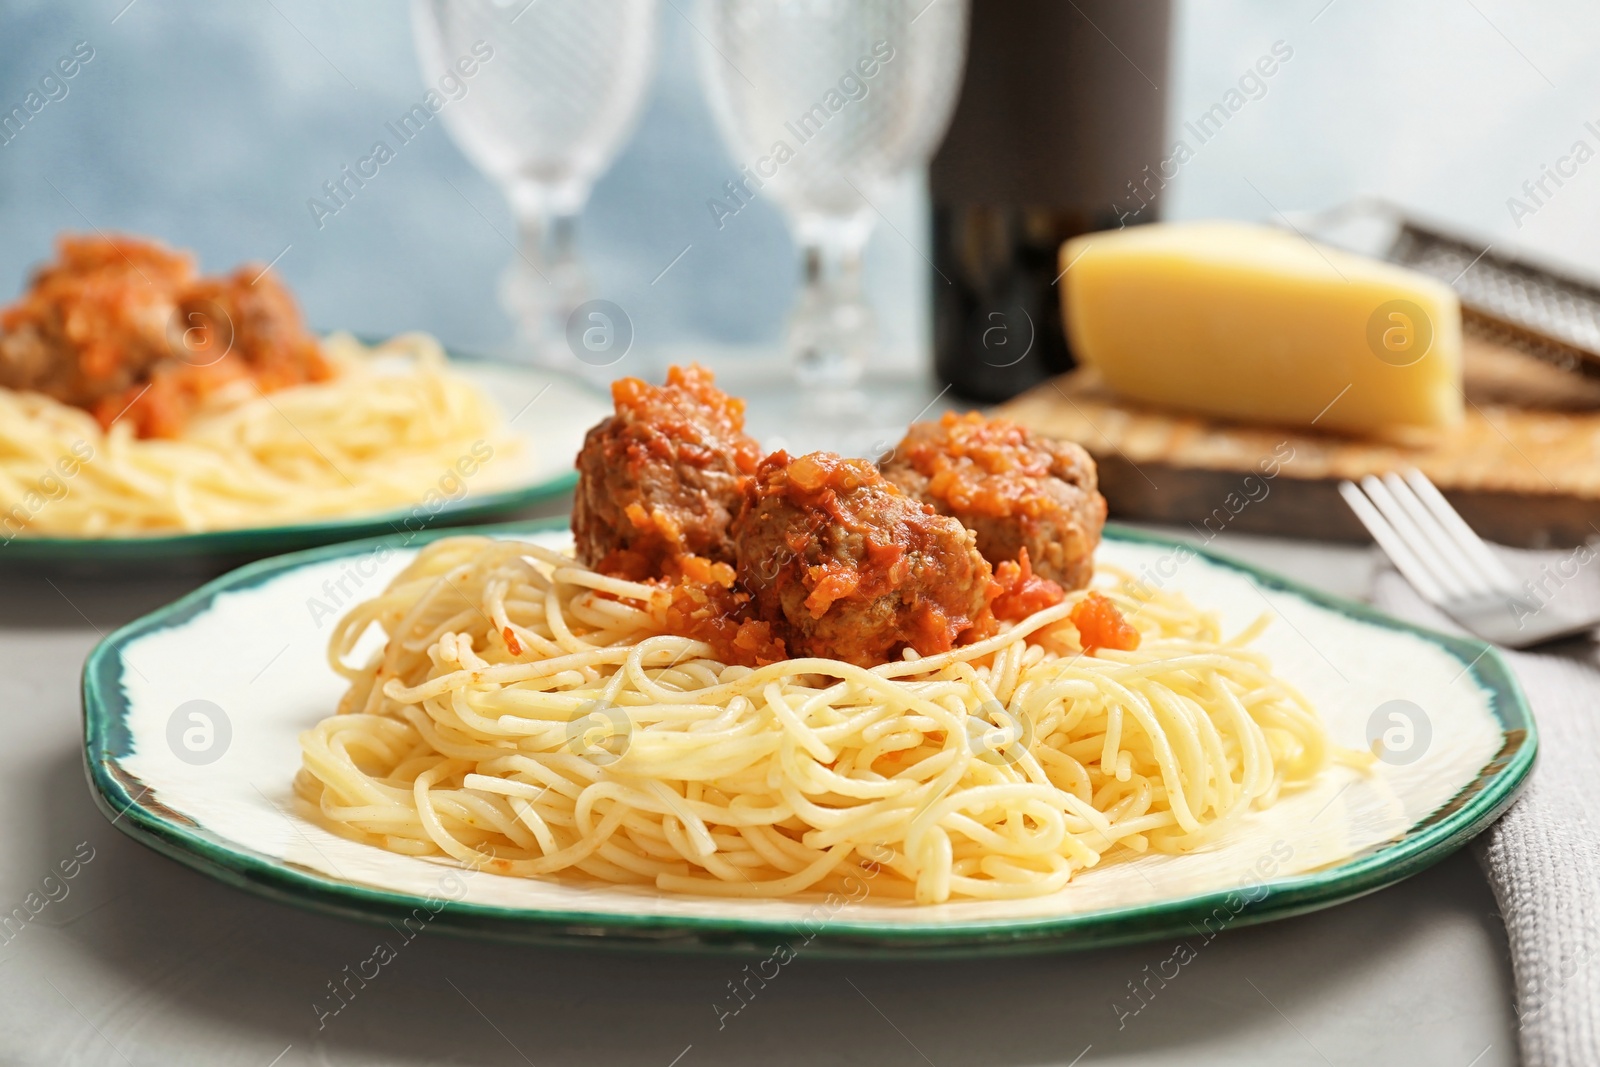 Photo of Delicious pasta with meatballs and tomato sauce on table